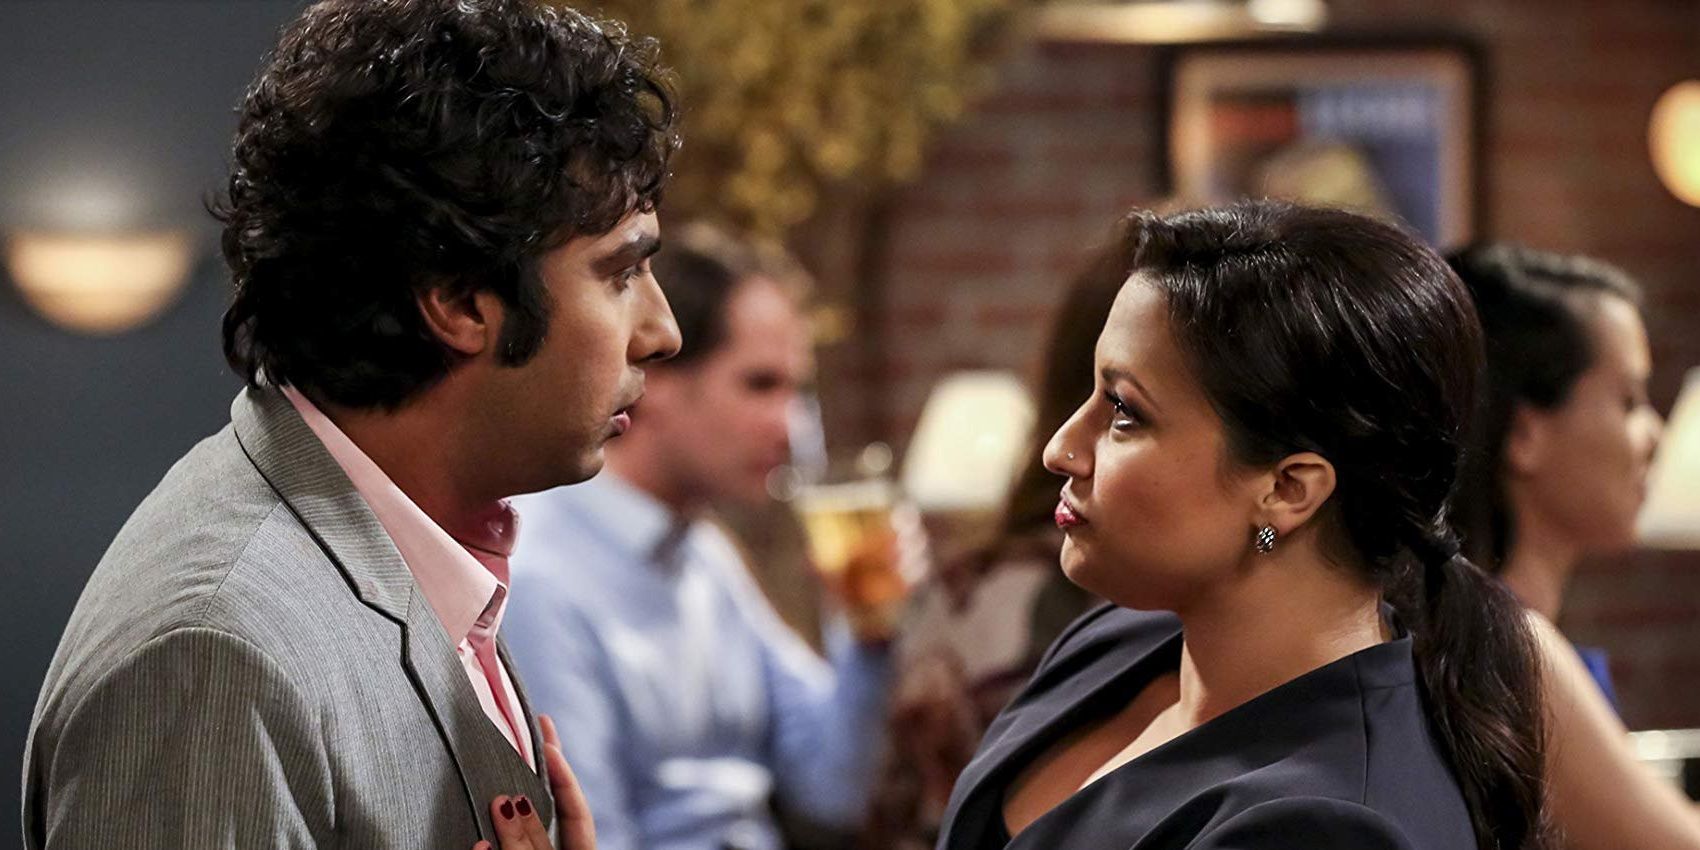 Raj and Anu on their first date on the Big Bang theory